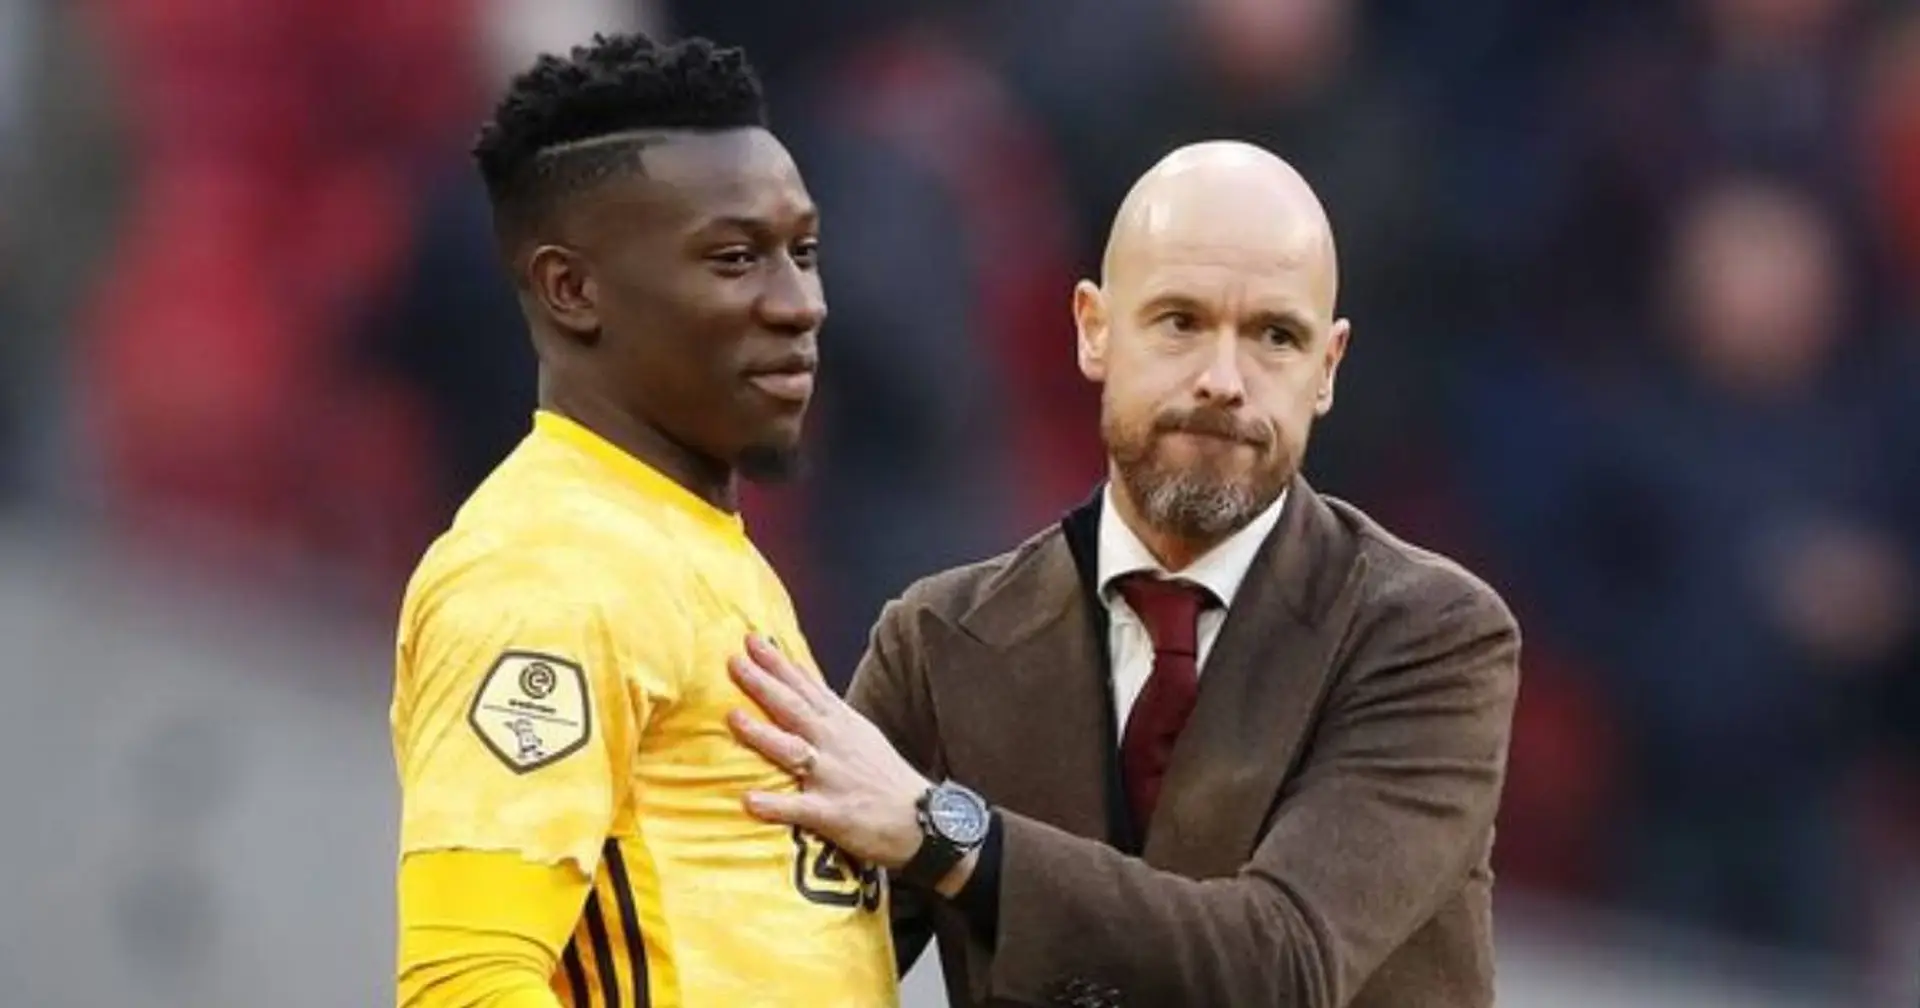 Andre Onana told Man United will 'score more goals' because of him - Football | Tribuna.com